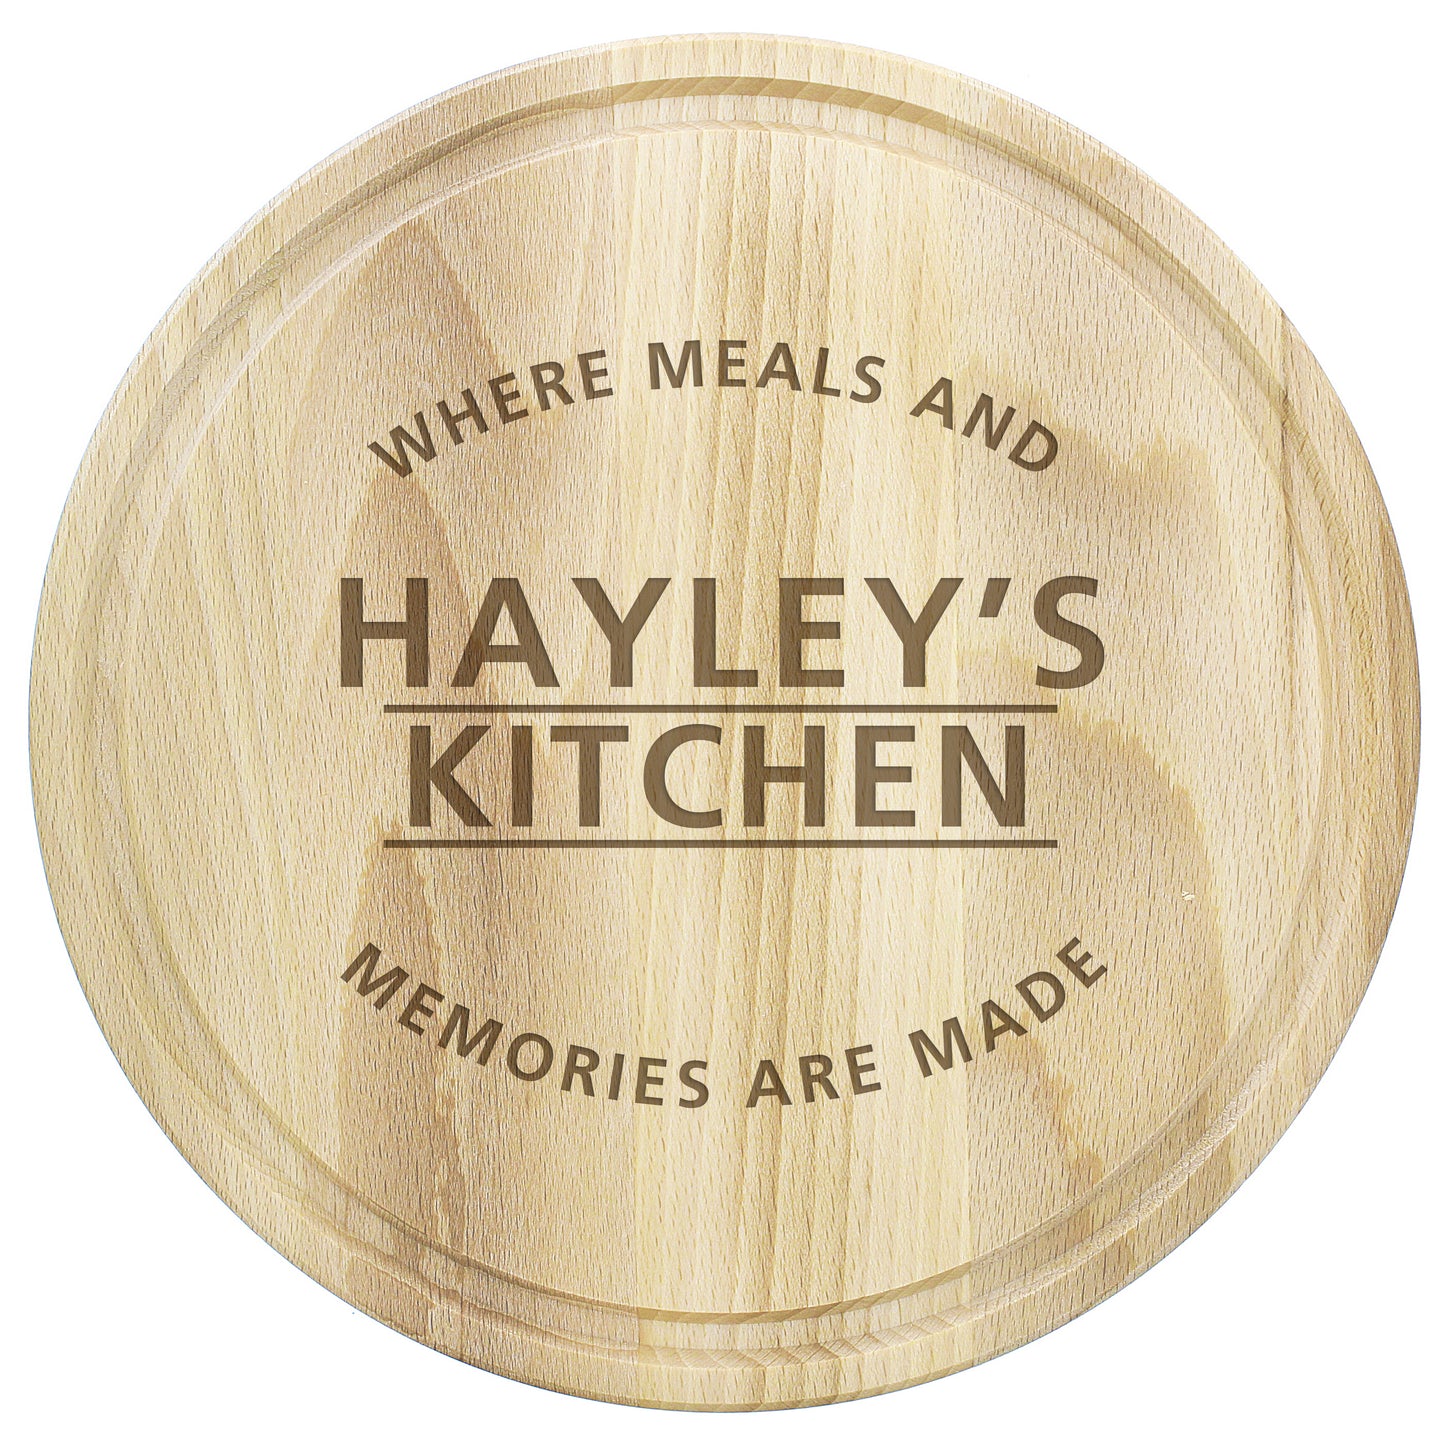 Personalised Chopping Board - Meals and Memories